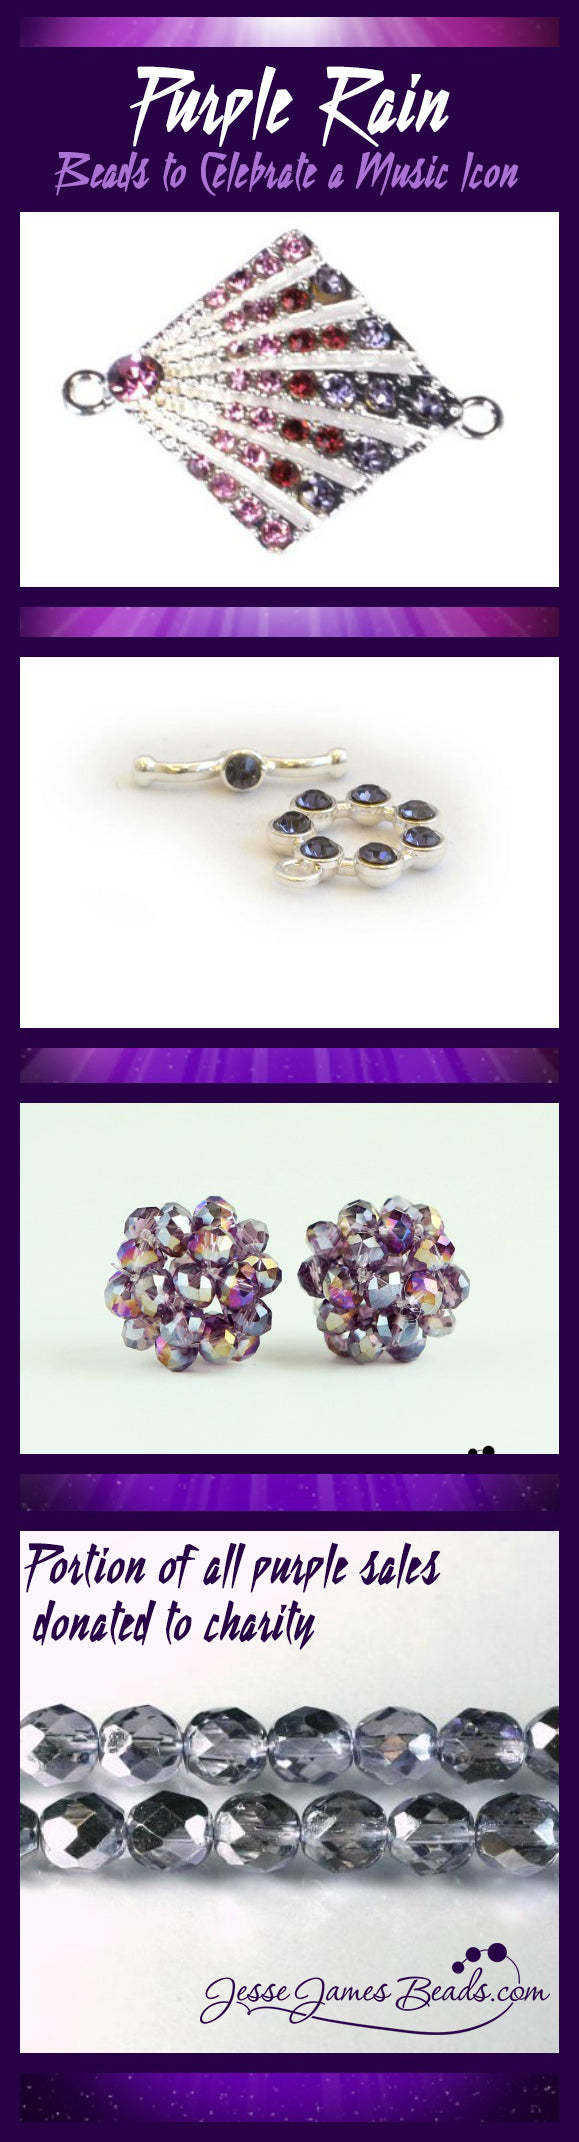 Purple beads to celebrate Prince - 10% of all purple sales will be donated in Prince's honor to Beads of Courage Charity